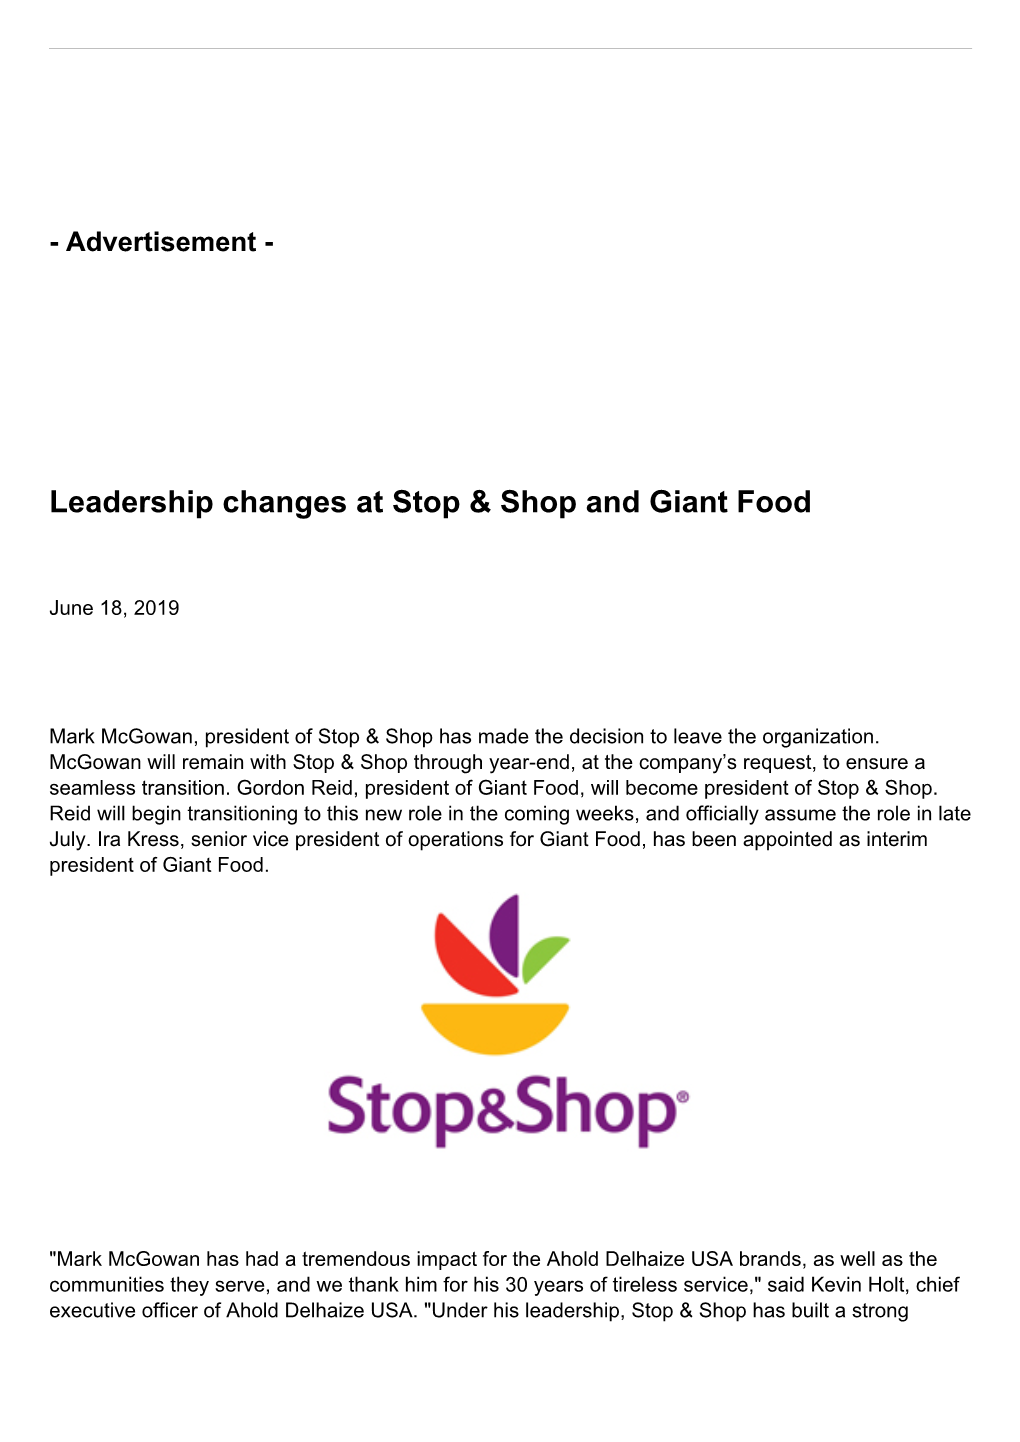 Leadership Changes at Stop & Shop and Giant Food